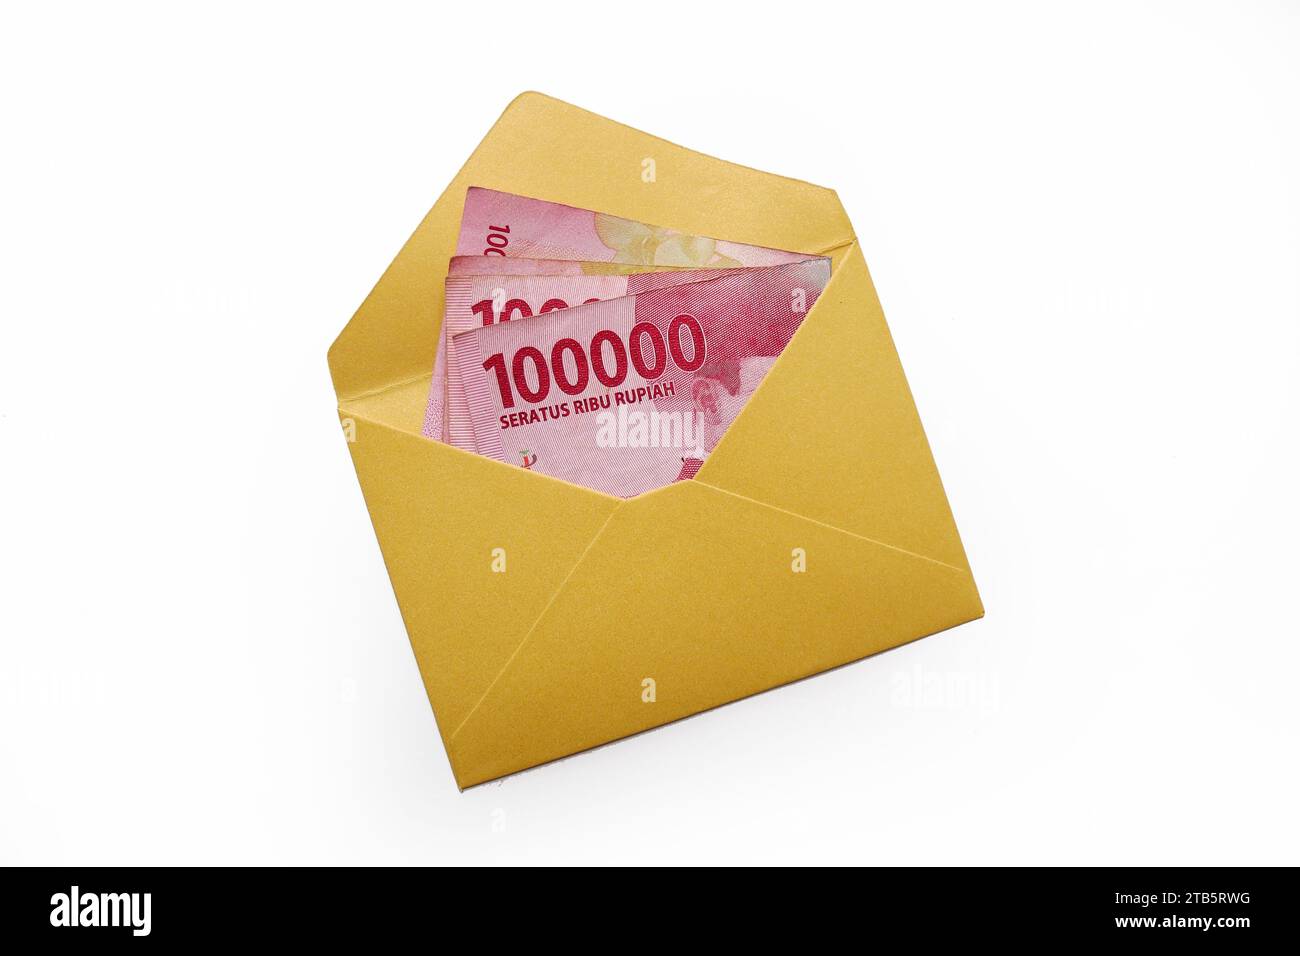 Money in an envelope on a white background. Rupiah is the currency of Indonesia Stock Photo